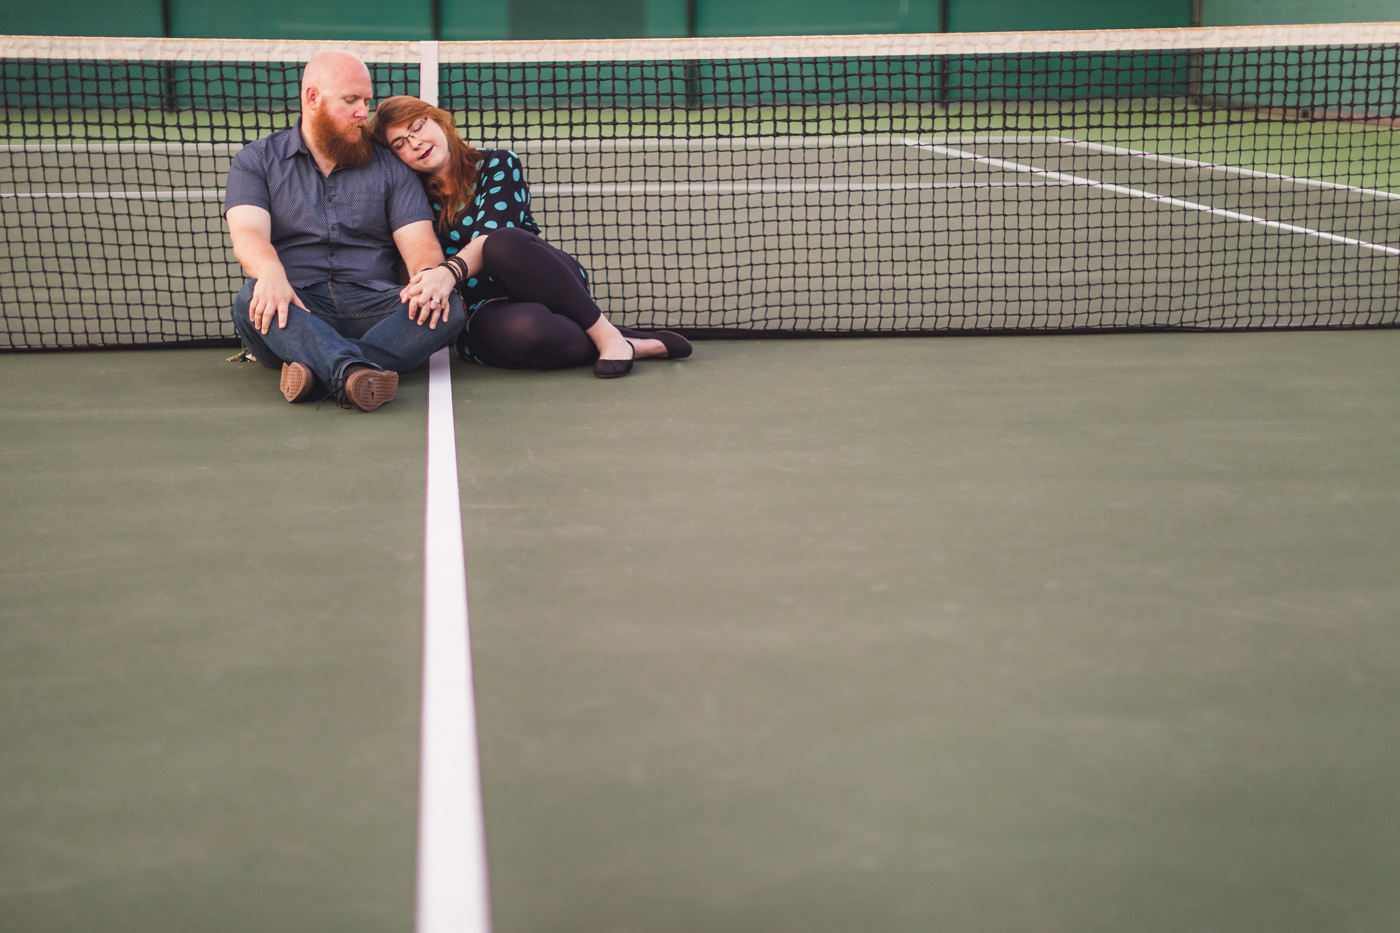 tennis-court-engagement-aaron-kes-photography